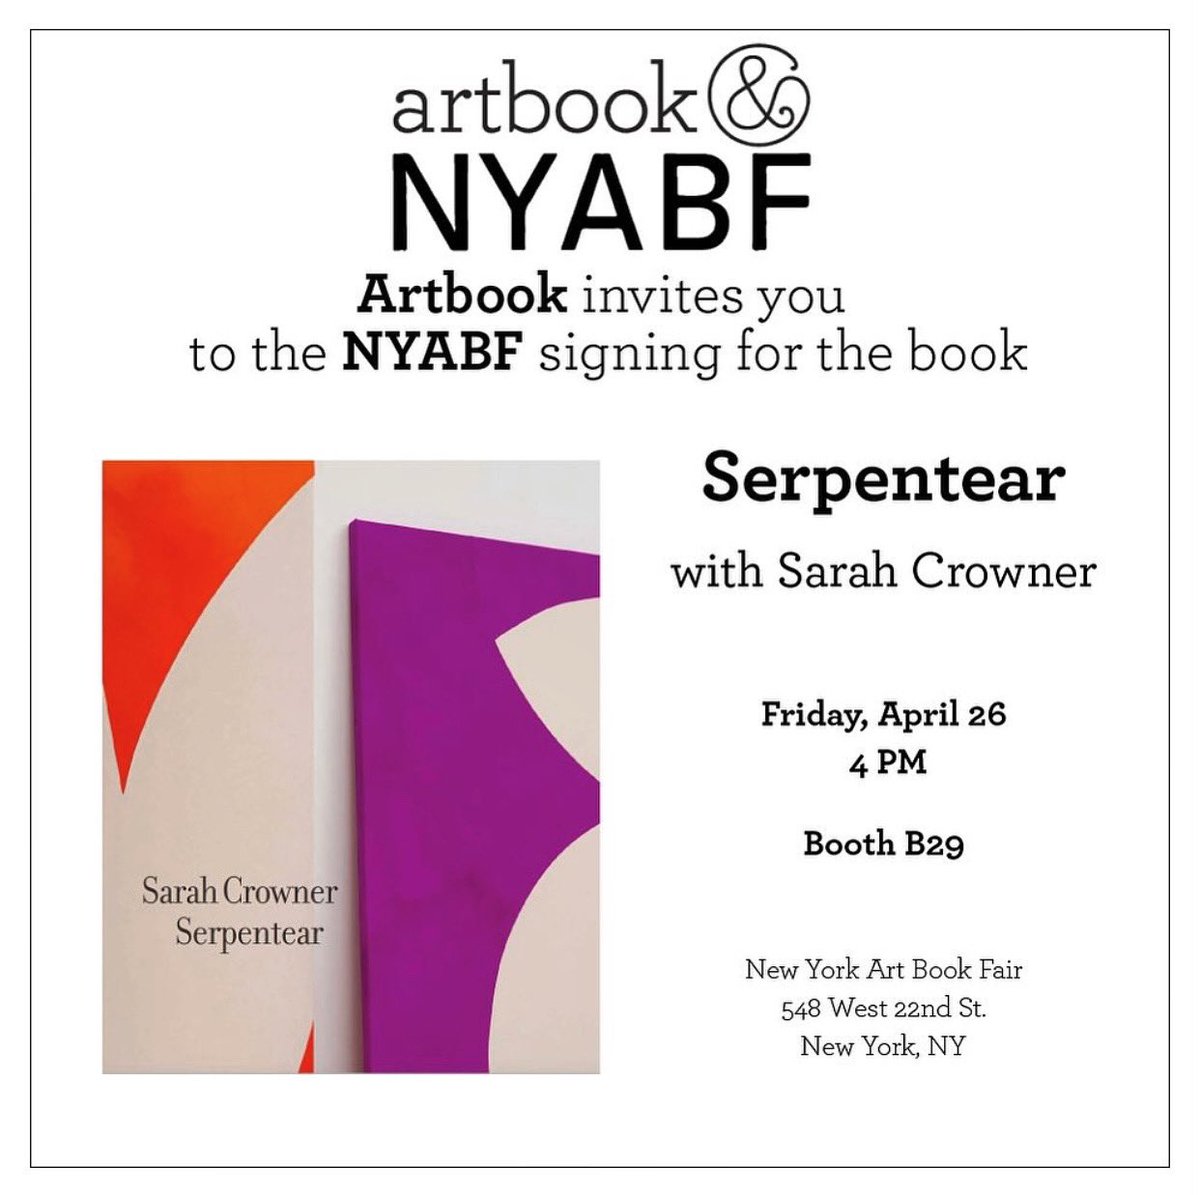 Today, at 4 PM, the artist Sarah Crowner will be signing copies of her book ‘Serpentear’ at @artbook in New York. ¡Do not miss her!